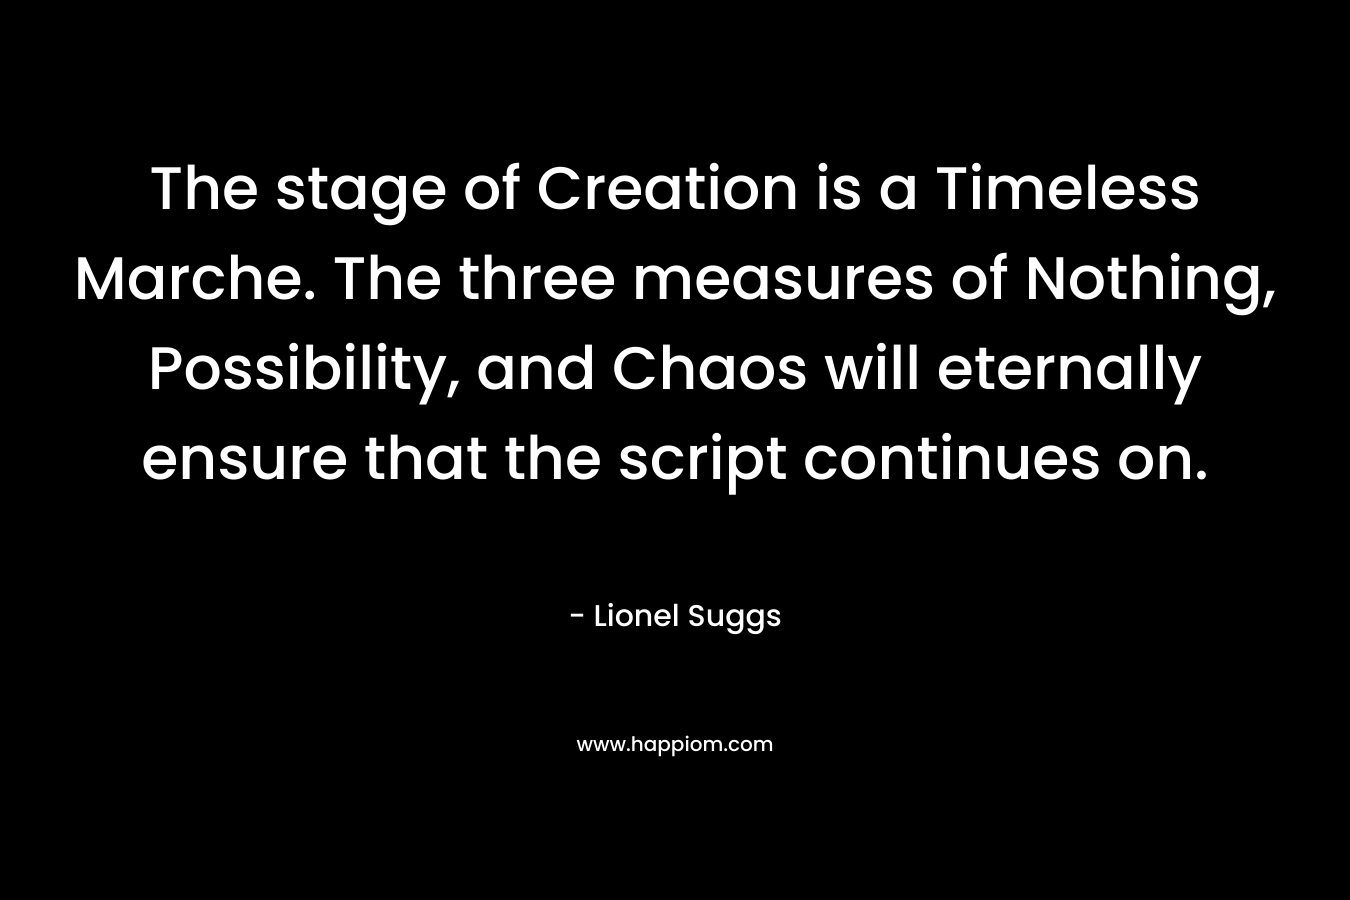 The stage of Creation is a Timeless Marche. The three measures of Nothing, Possibility, and Chaos will eternally ensure that the script continues on.